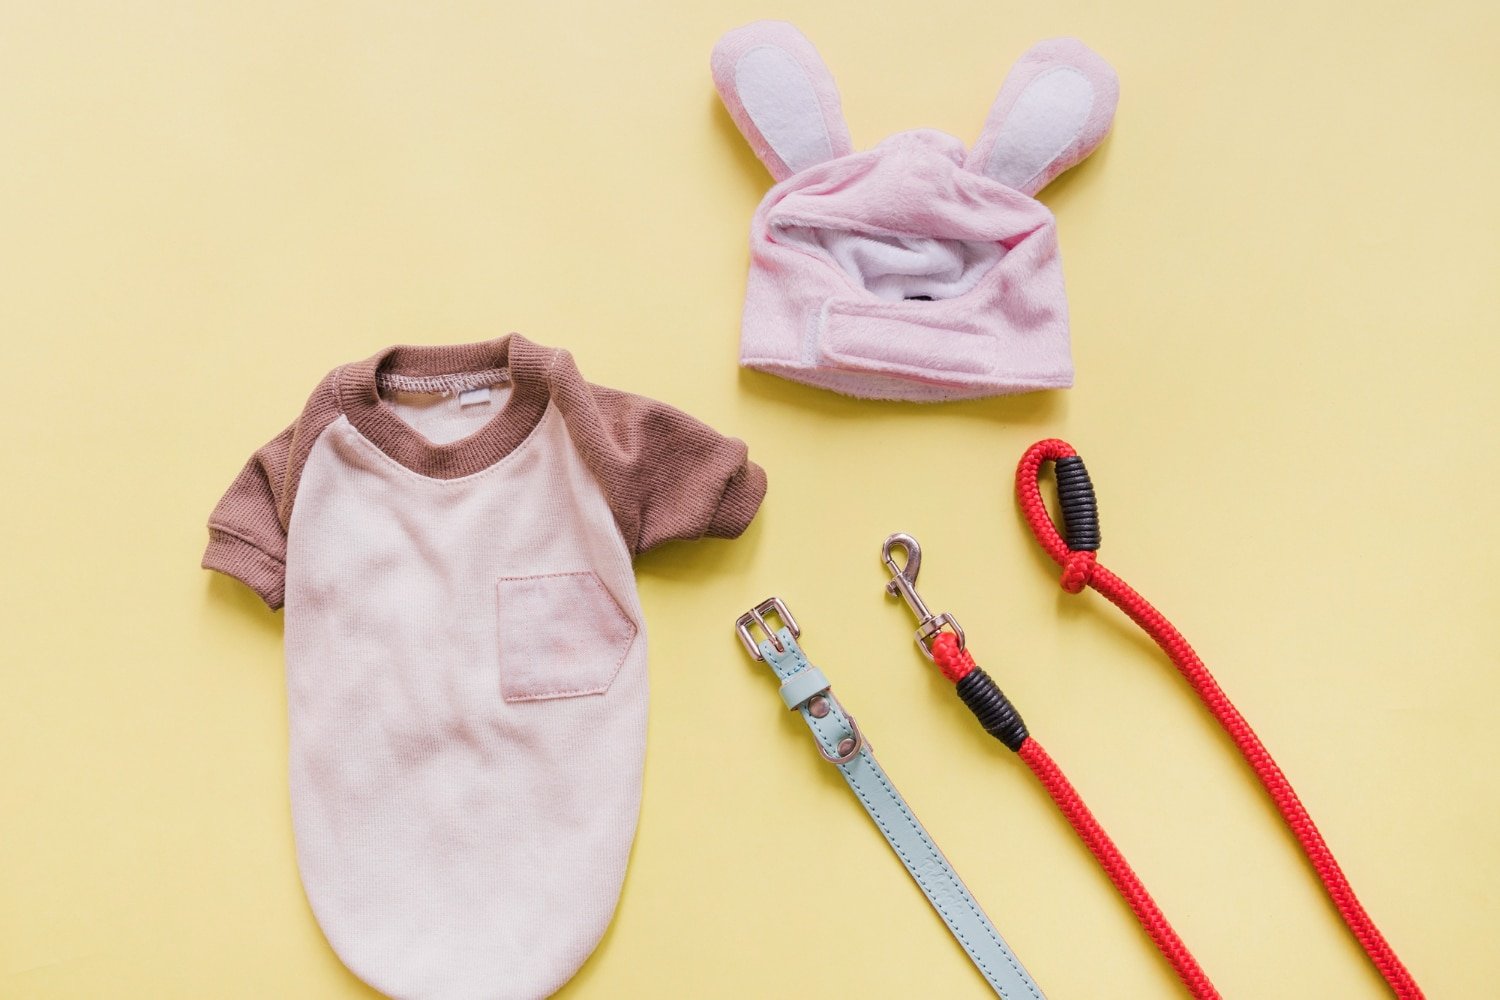 Read more about the article Gently Used Baby Gear by GOOD BUY GEAR